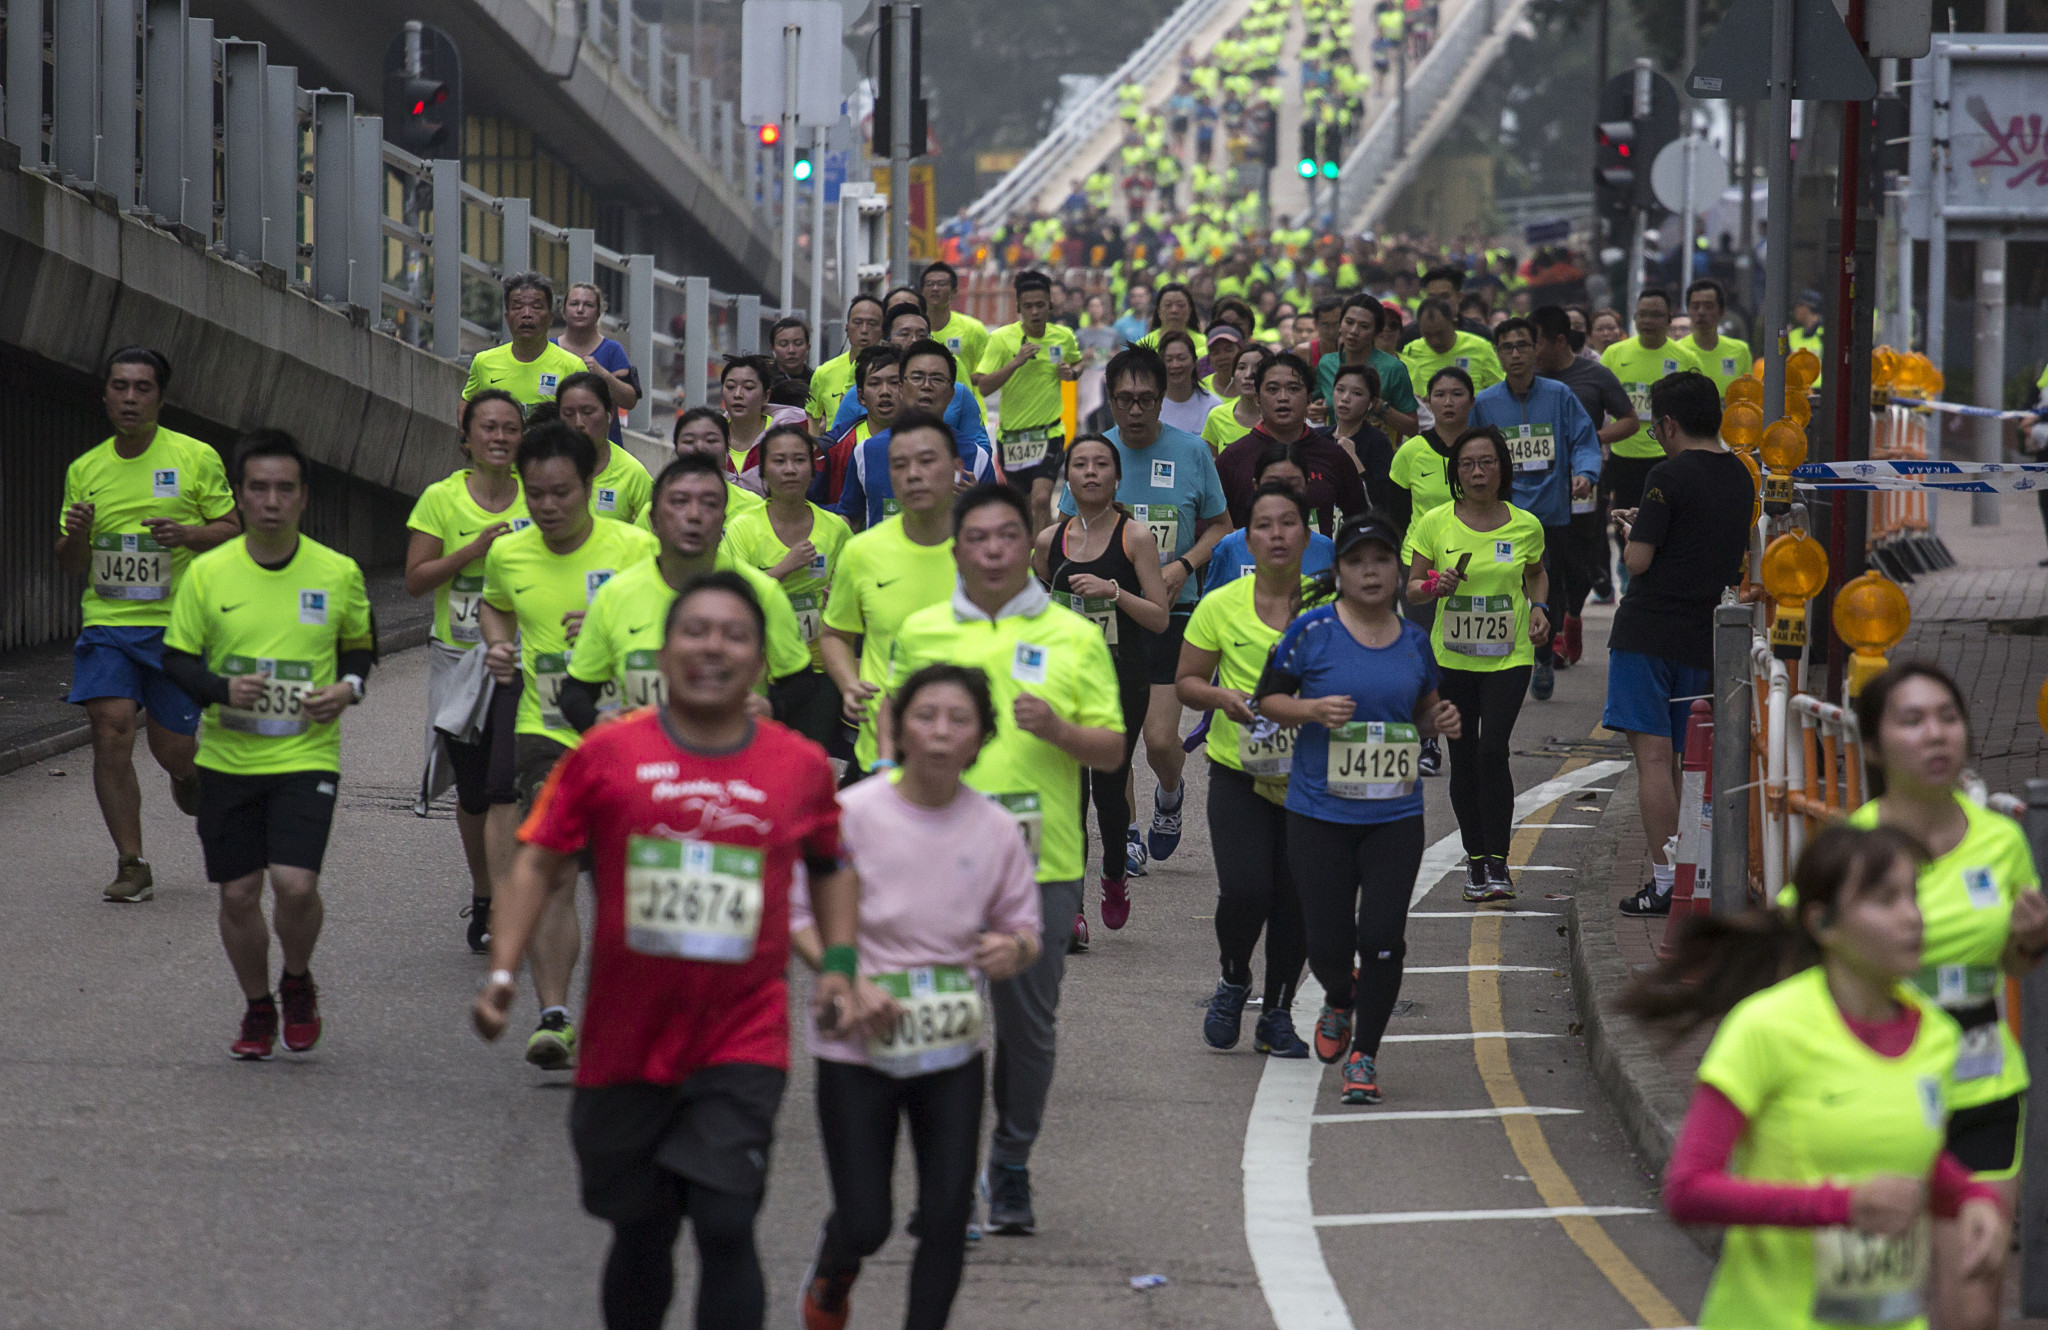 The 2021 Hong Kong Marathon, postponed to October, will take place with a 75 per cent cut in its normal level of participants due to COVID-19 restrictions ©Getty Images